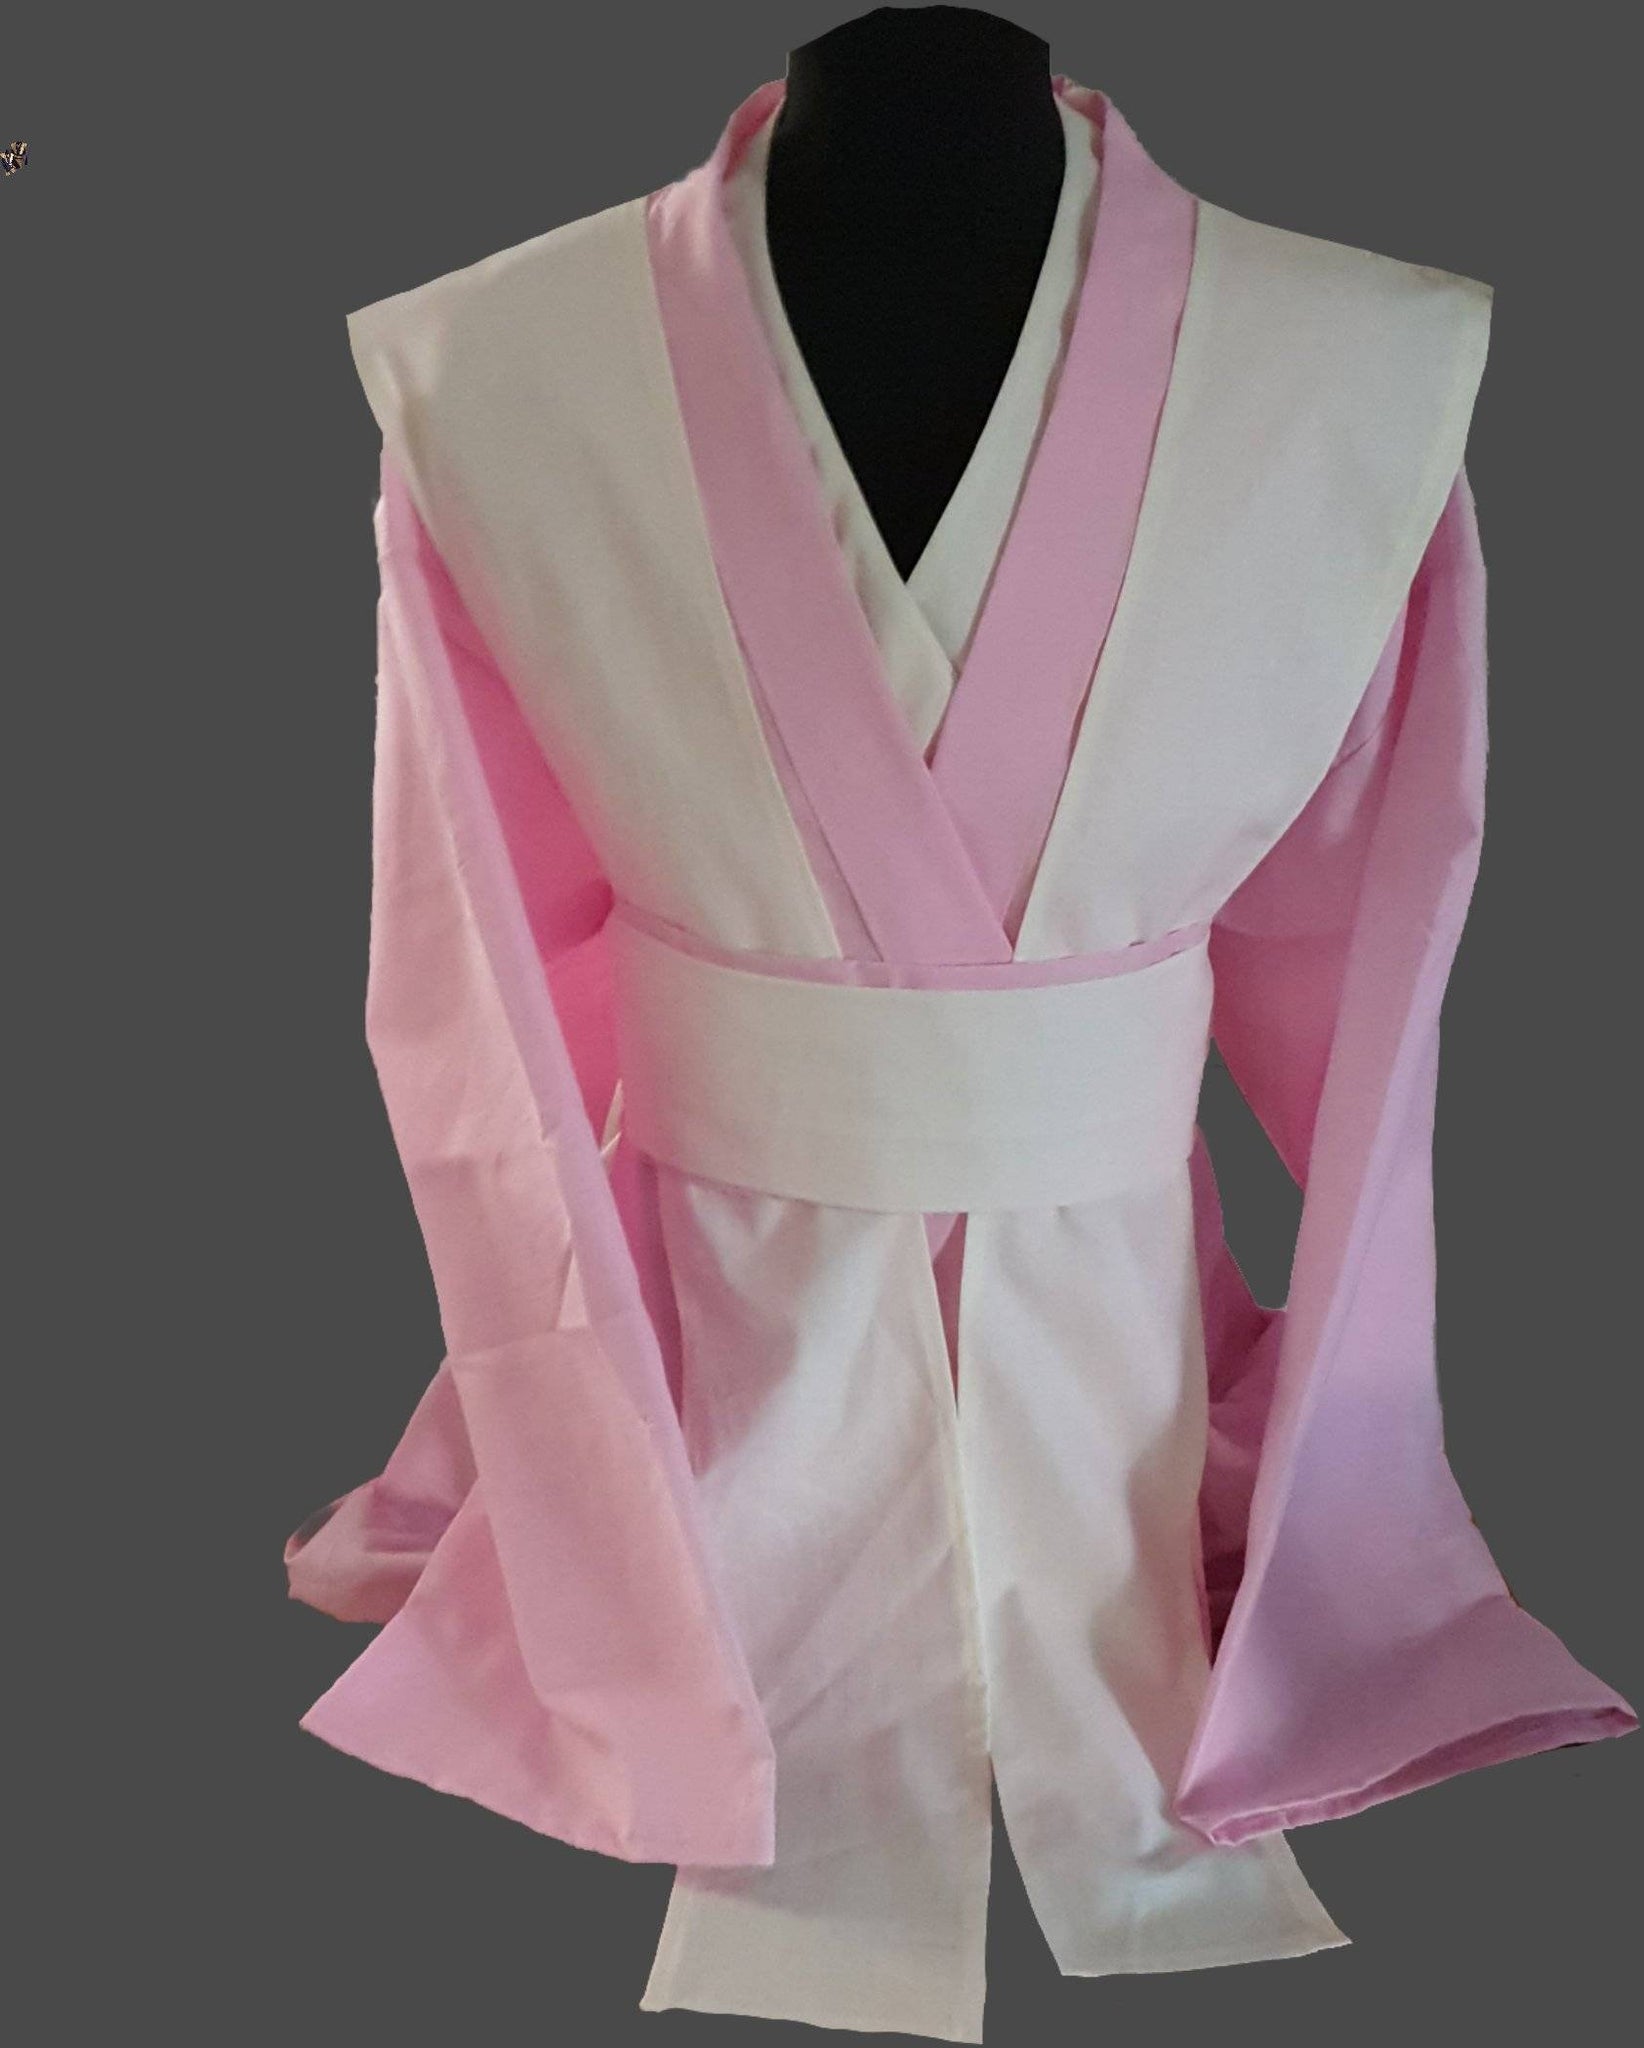 All sizes available worldwide shipping Handmade jedi robe set inspired by Star Wars